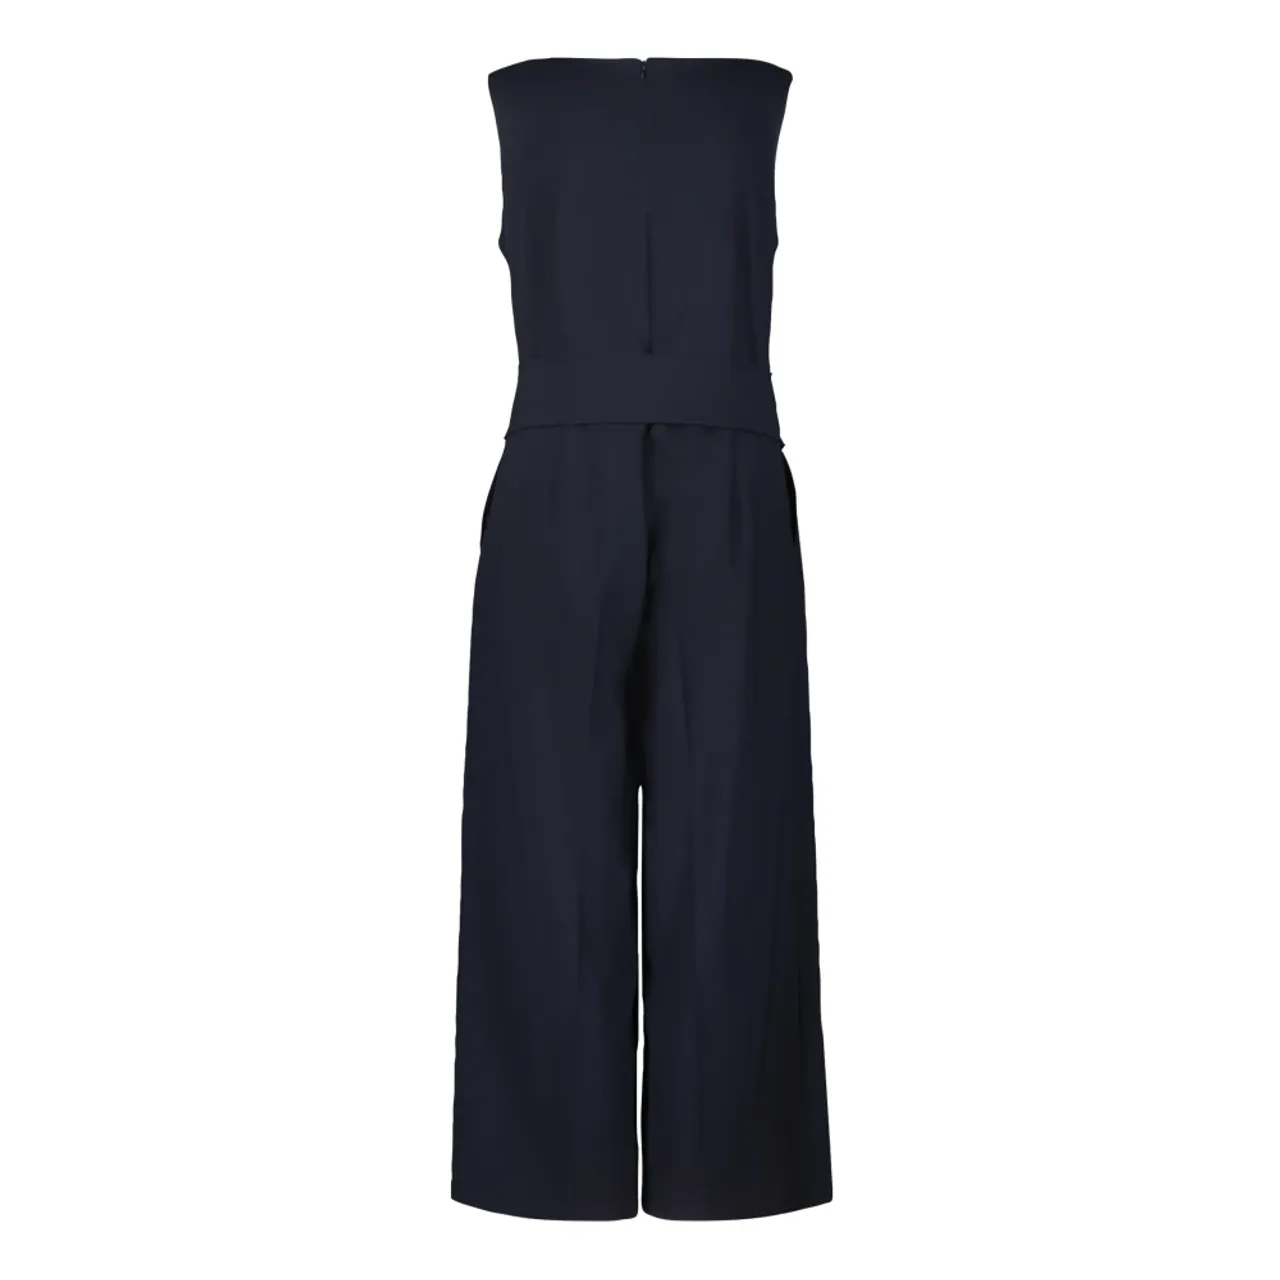 Jumpsuit Betty Barclay